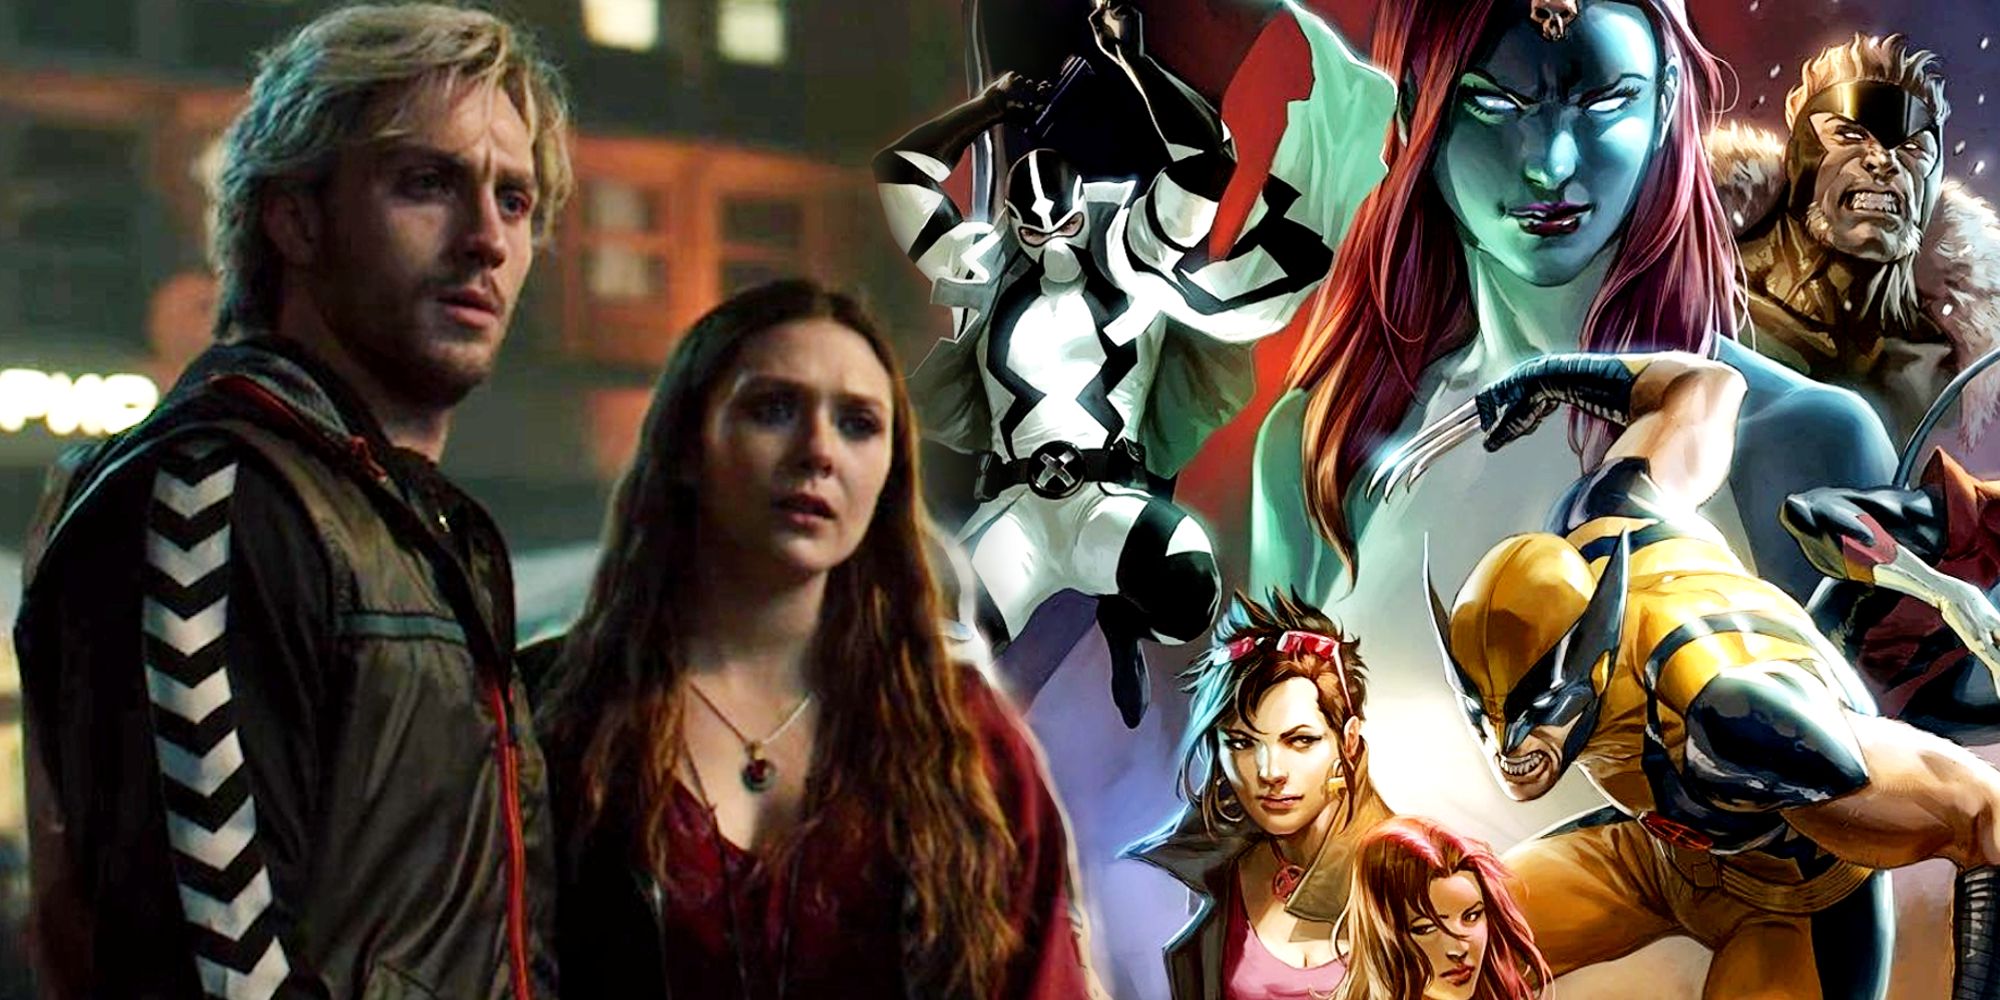 Quicksilver and Scarlet Witch in Avengers Age of Ultron and X-Men